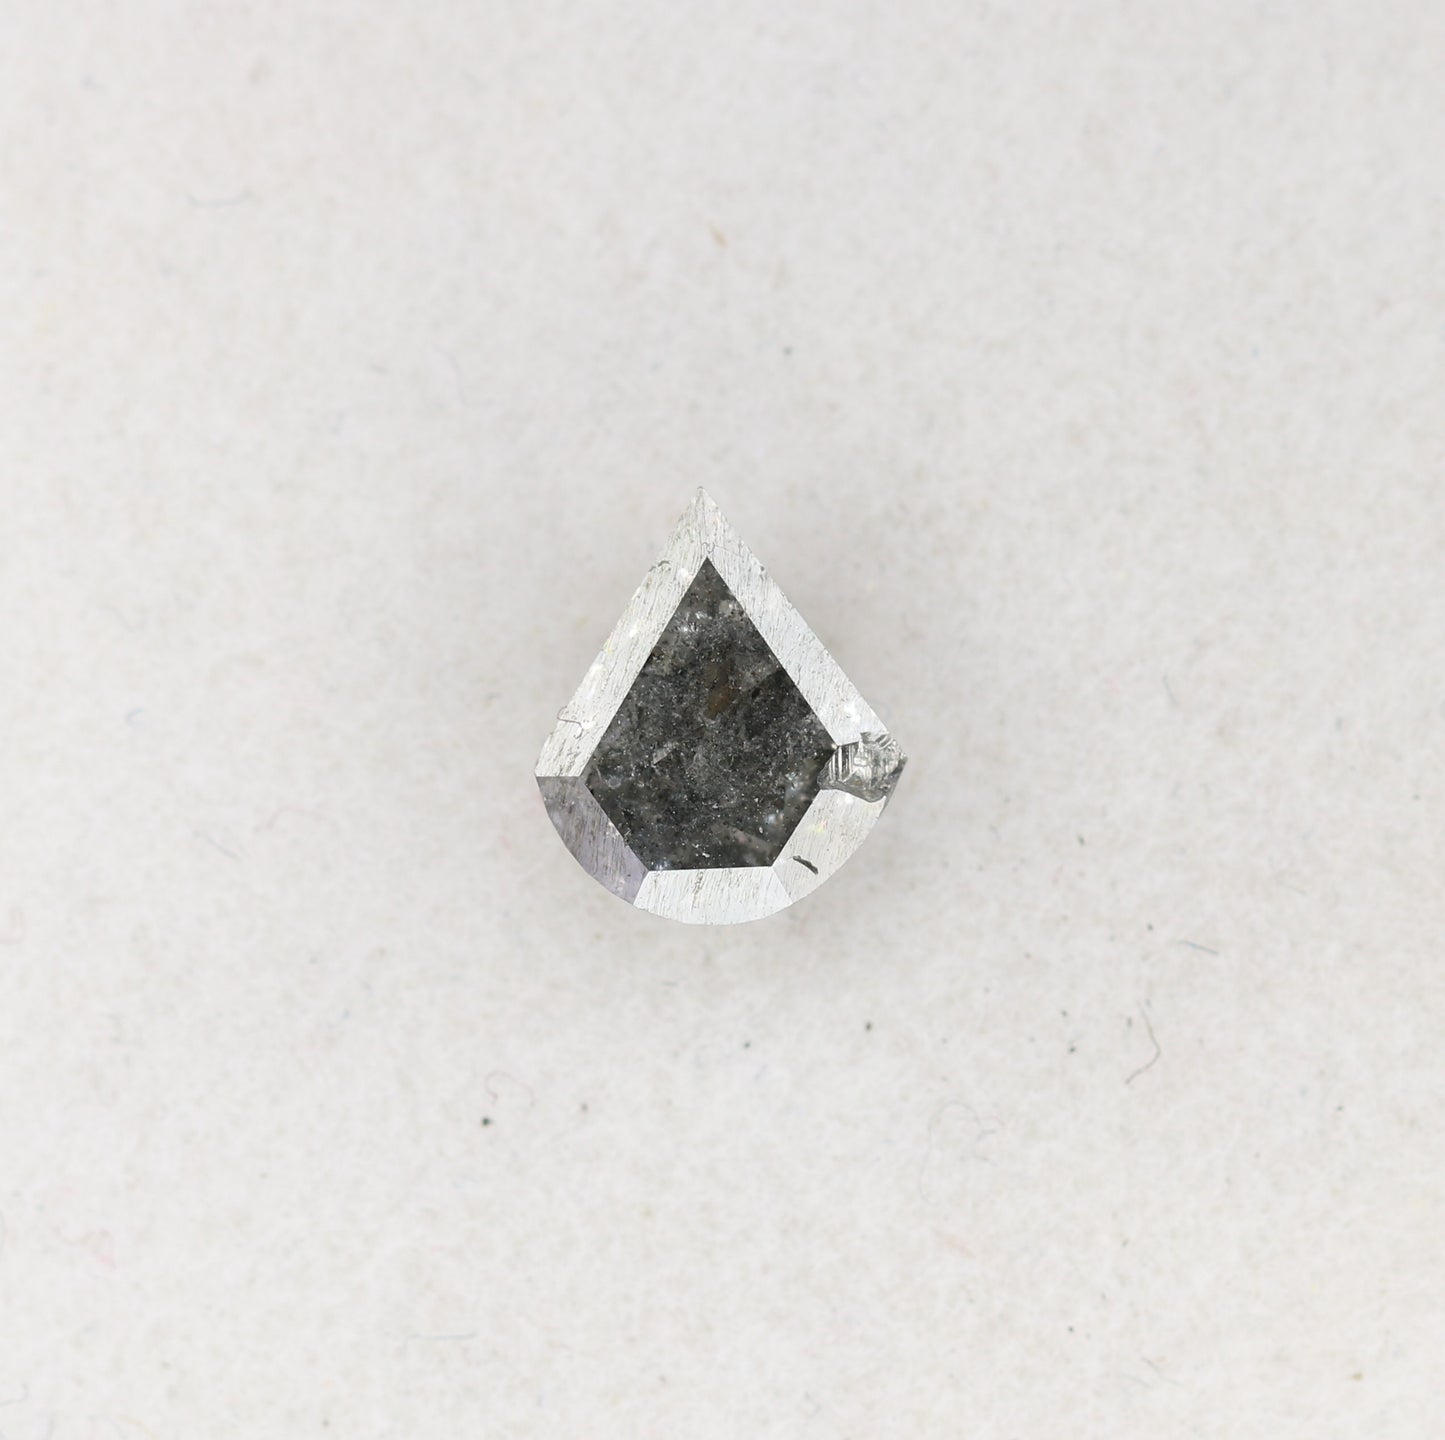 Natural Loose 1.11 CT Trillion Shape Salt and Pepper Grey Galaxy Diamond for Gift